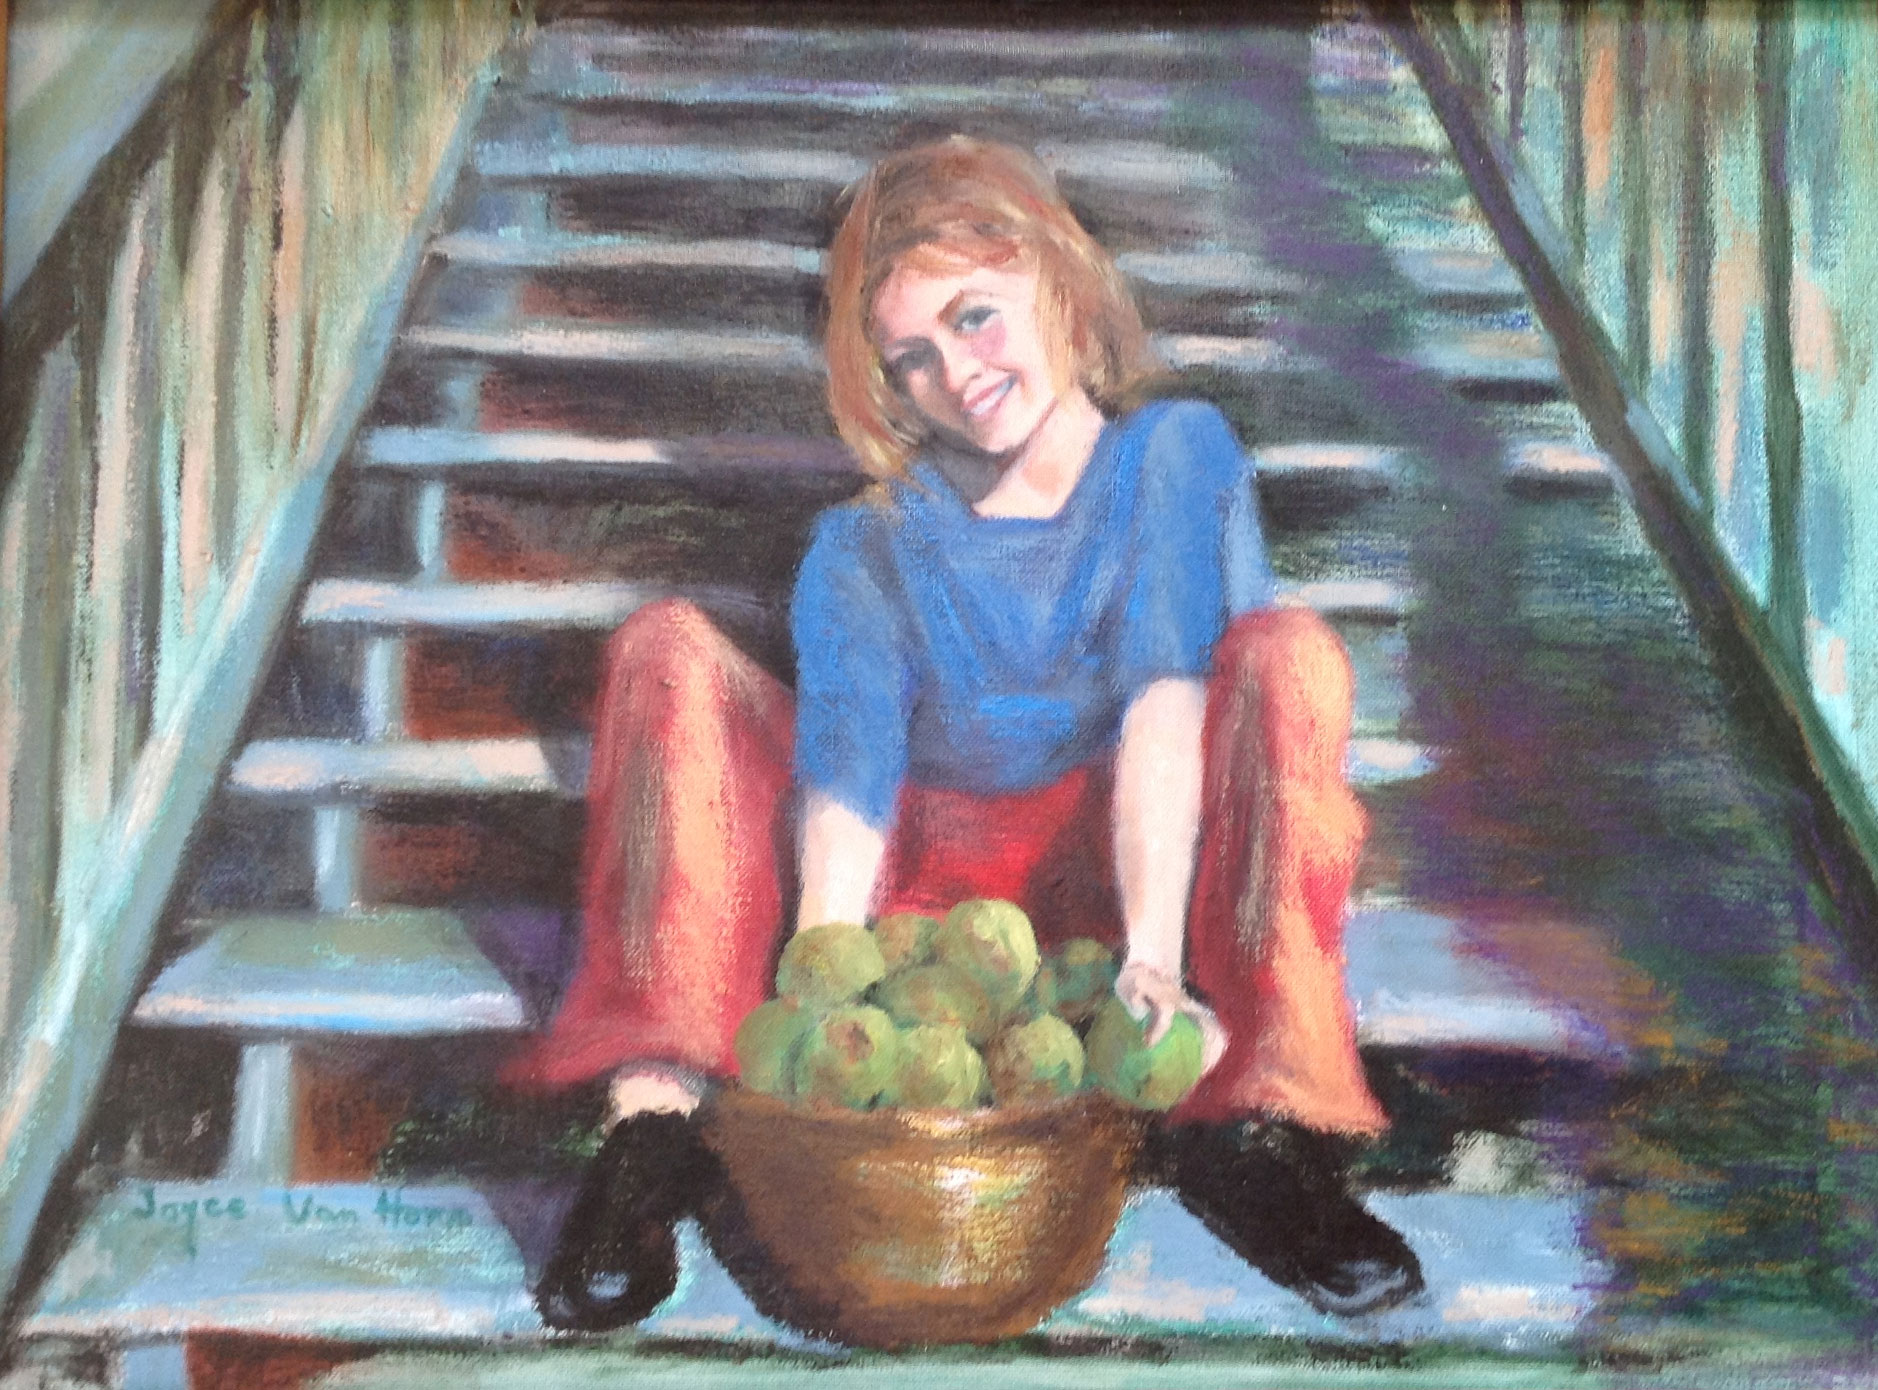 Jeannette with Apples